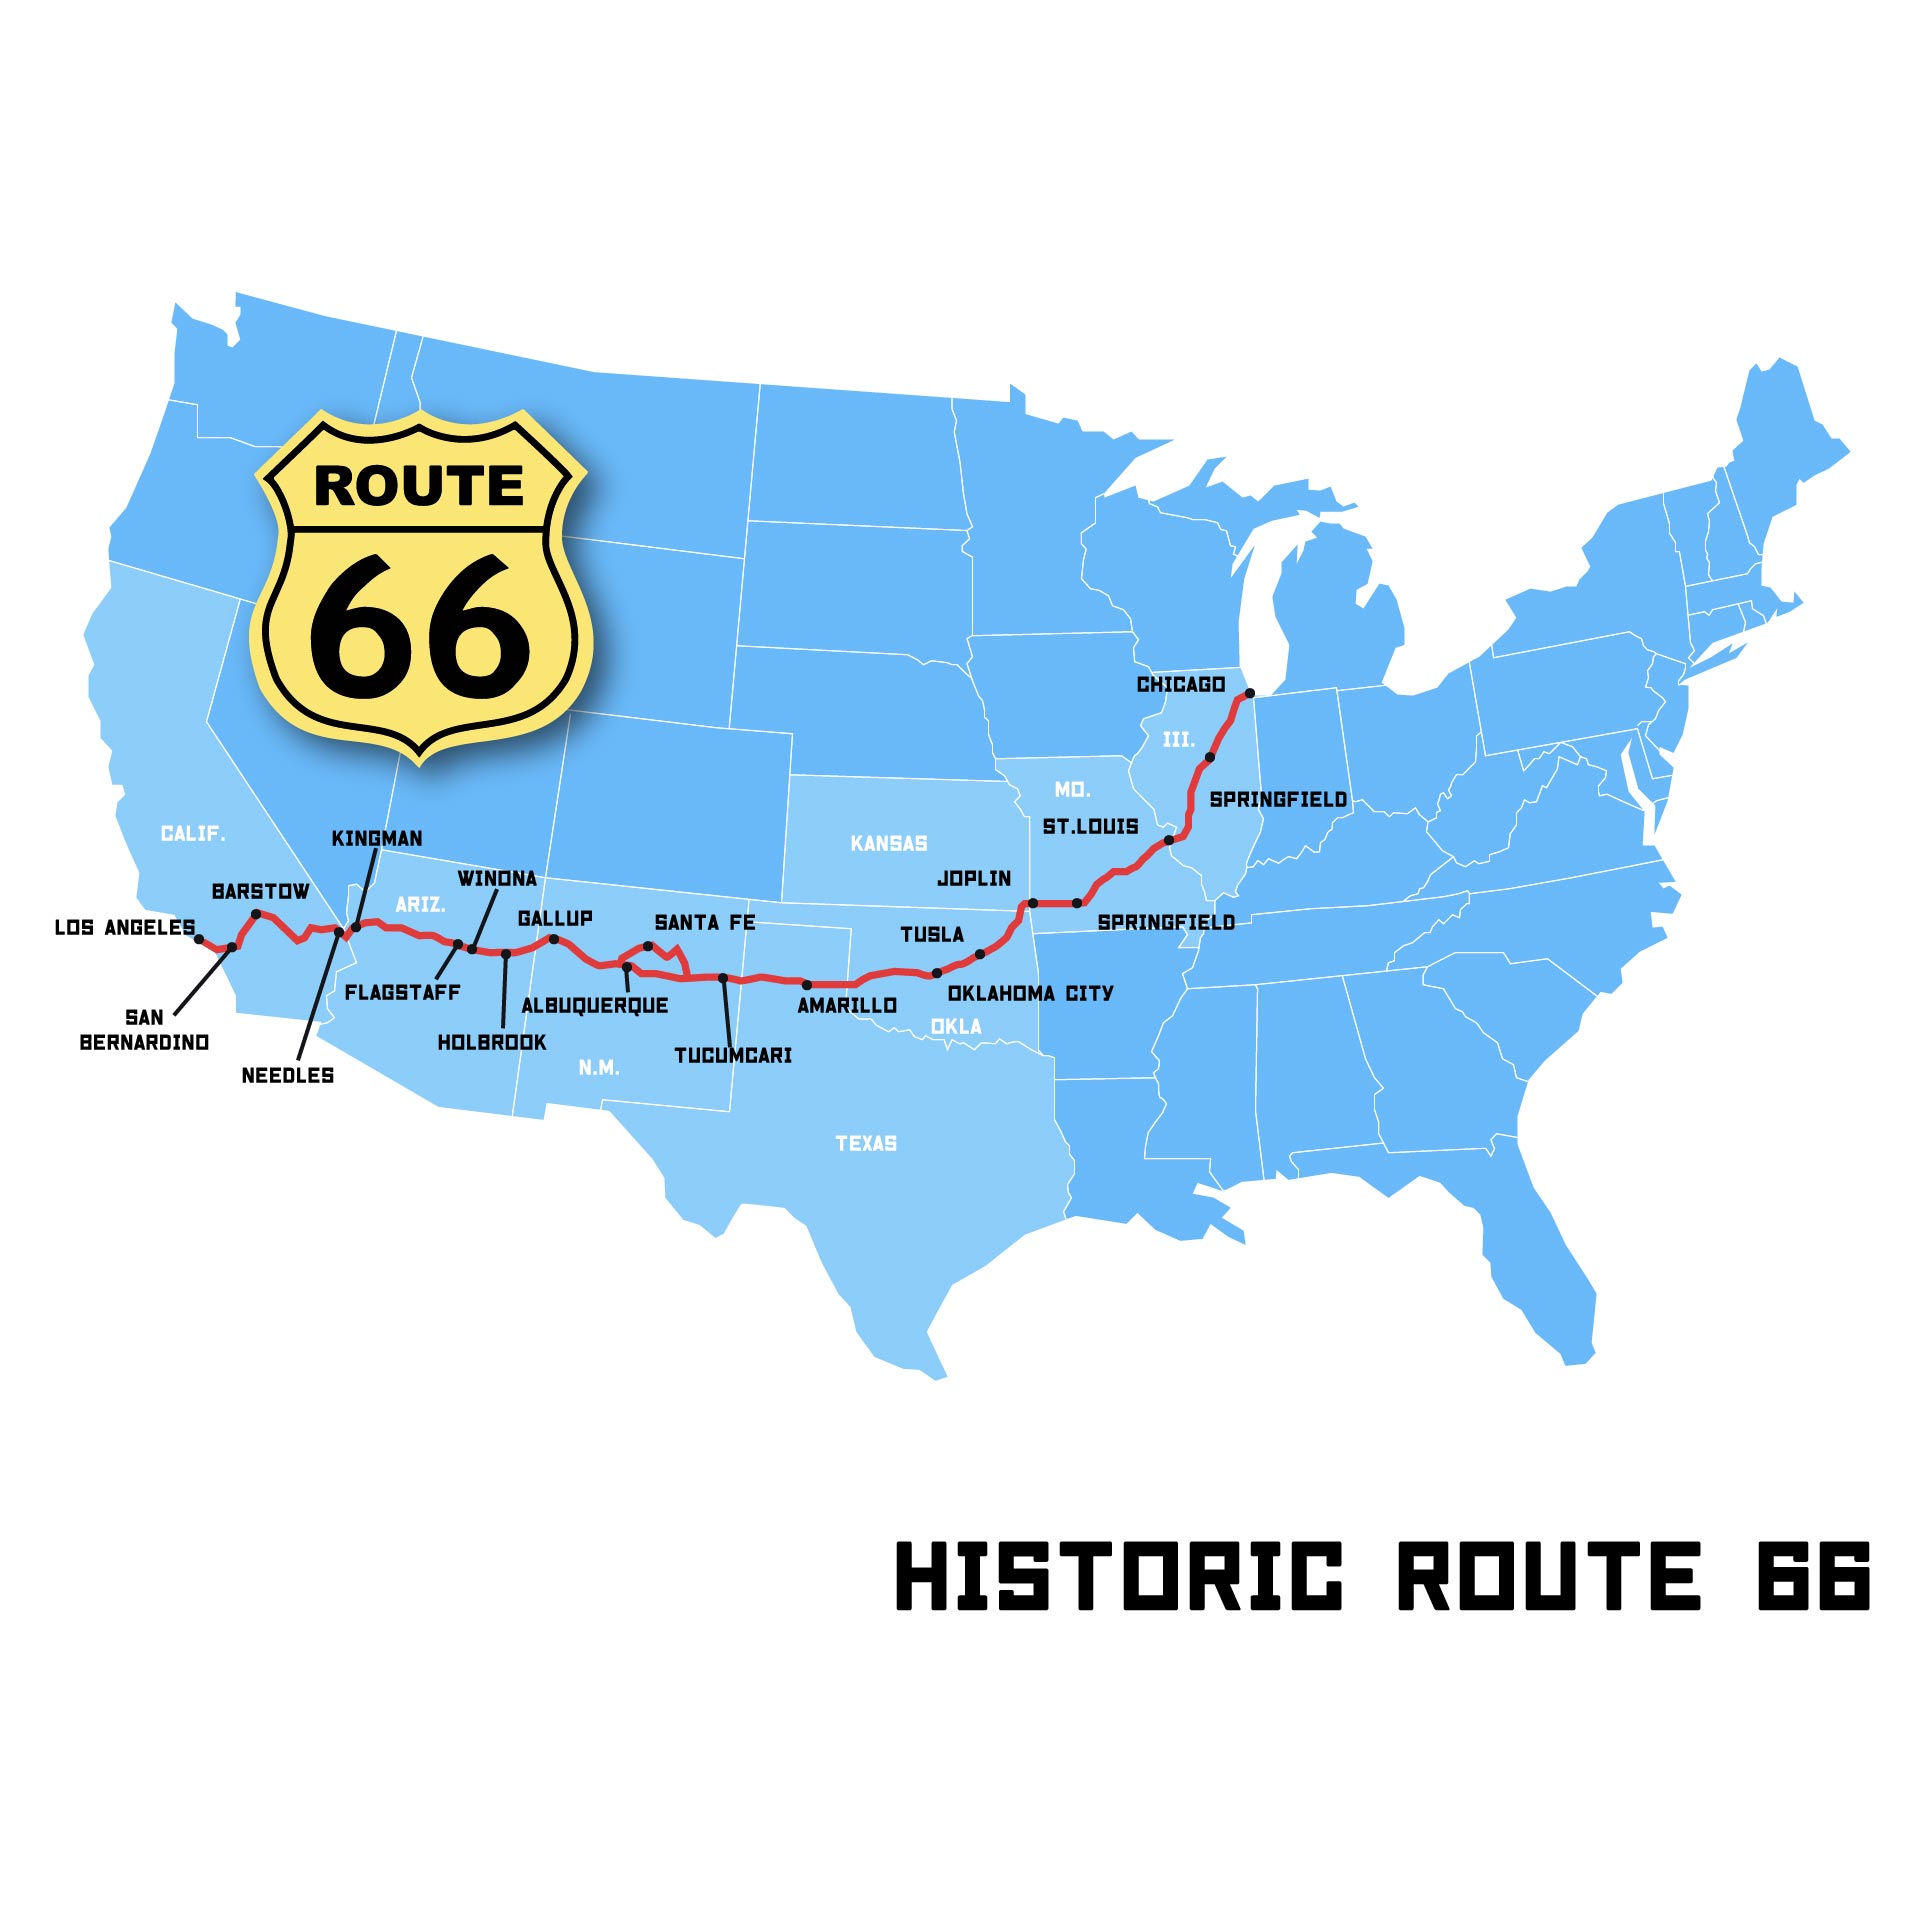 6-best-images-of-printable-route-maps-printable-route-66-map-united